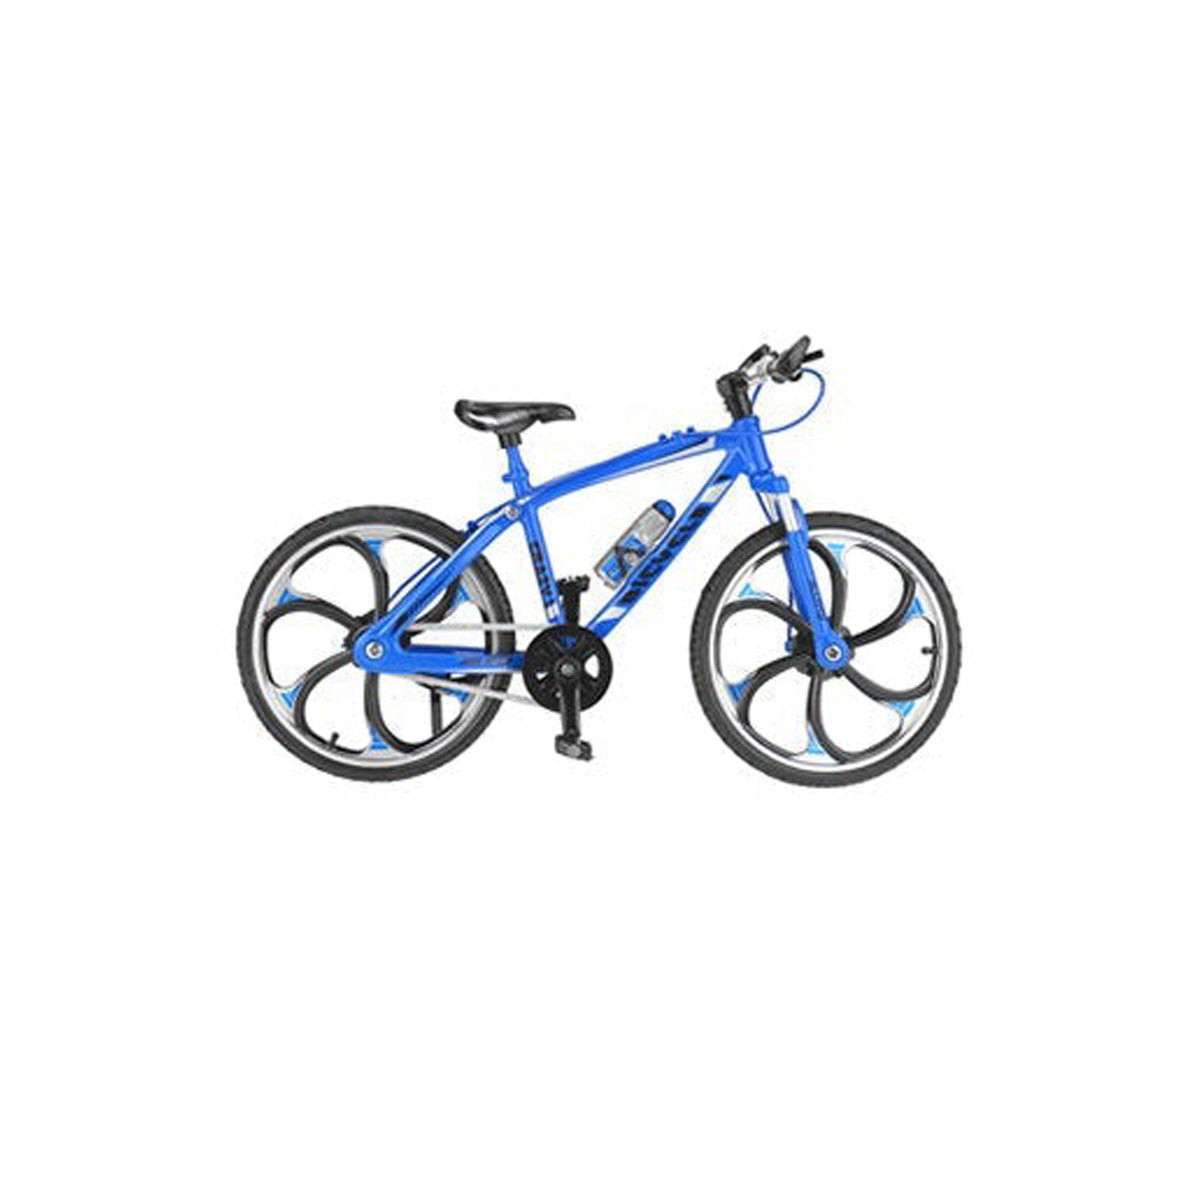 1:10 3D Mini Multi-color Alloy Mountain Racing Bicycle Rotatable Wheel Diecast Model Toy for Decoration Gift